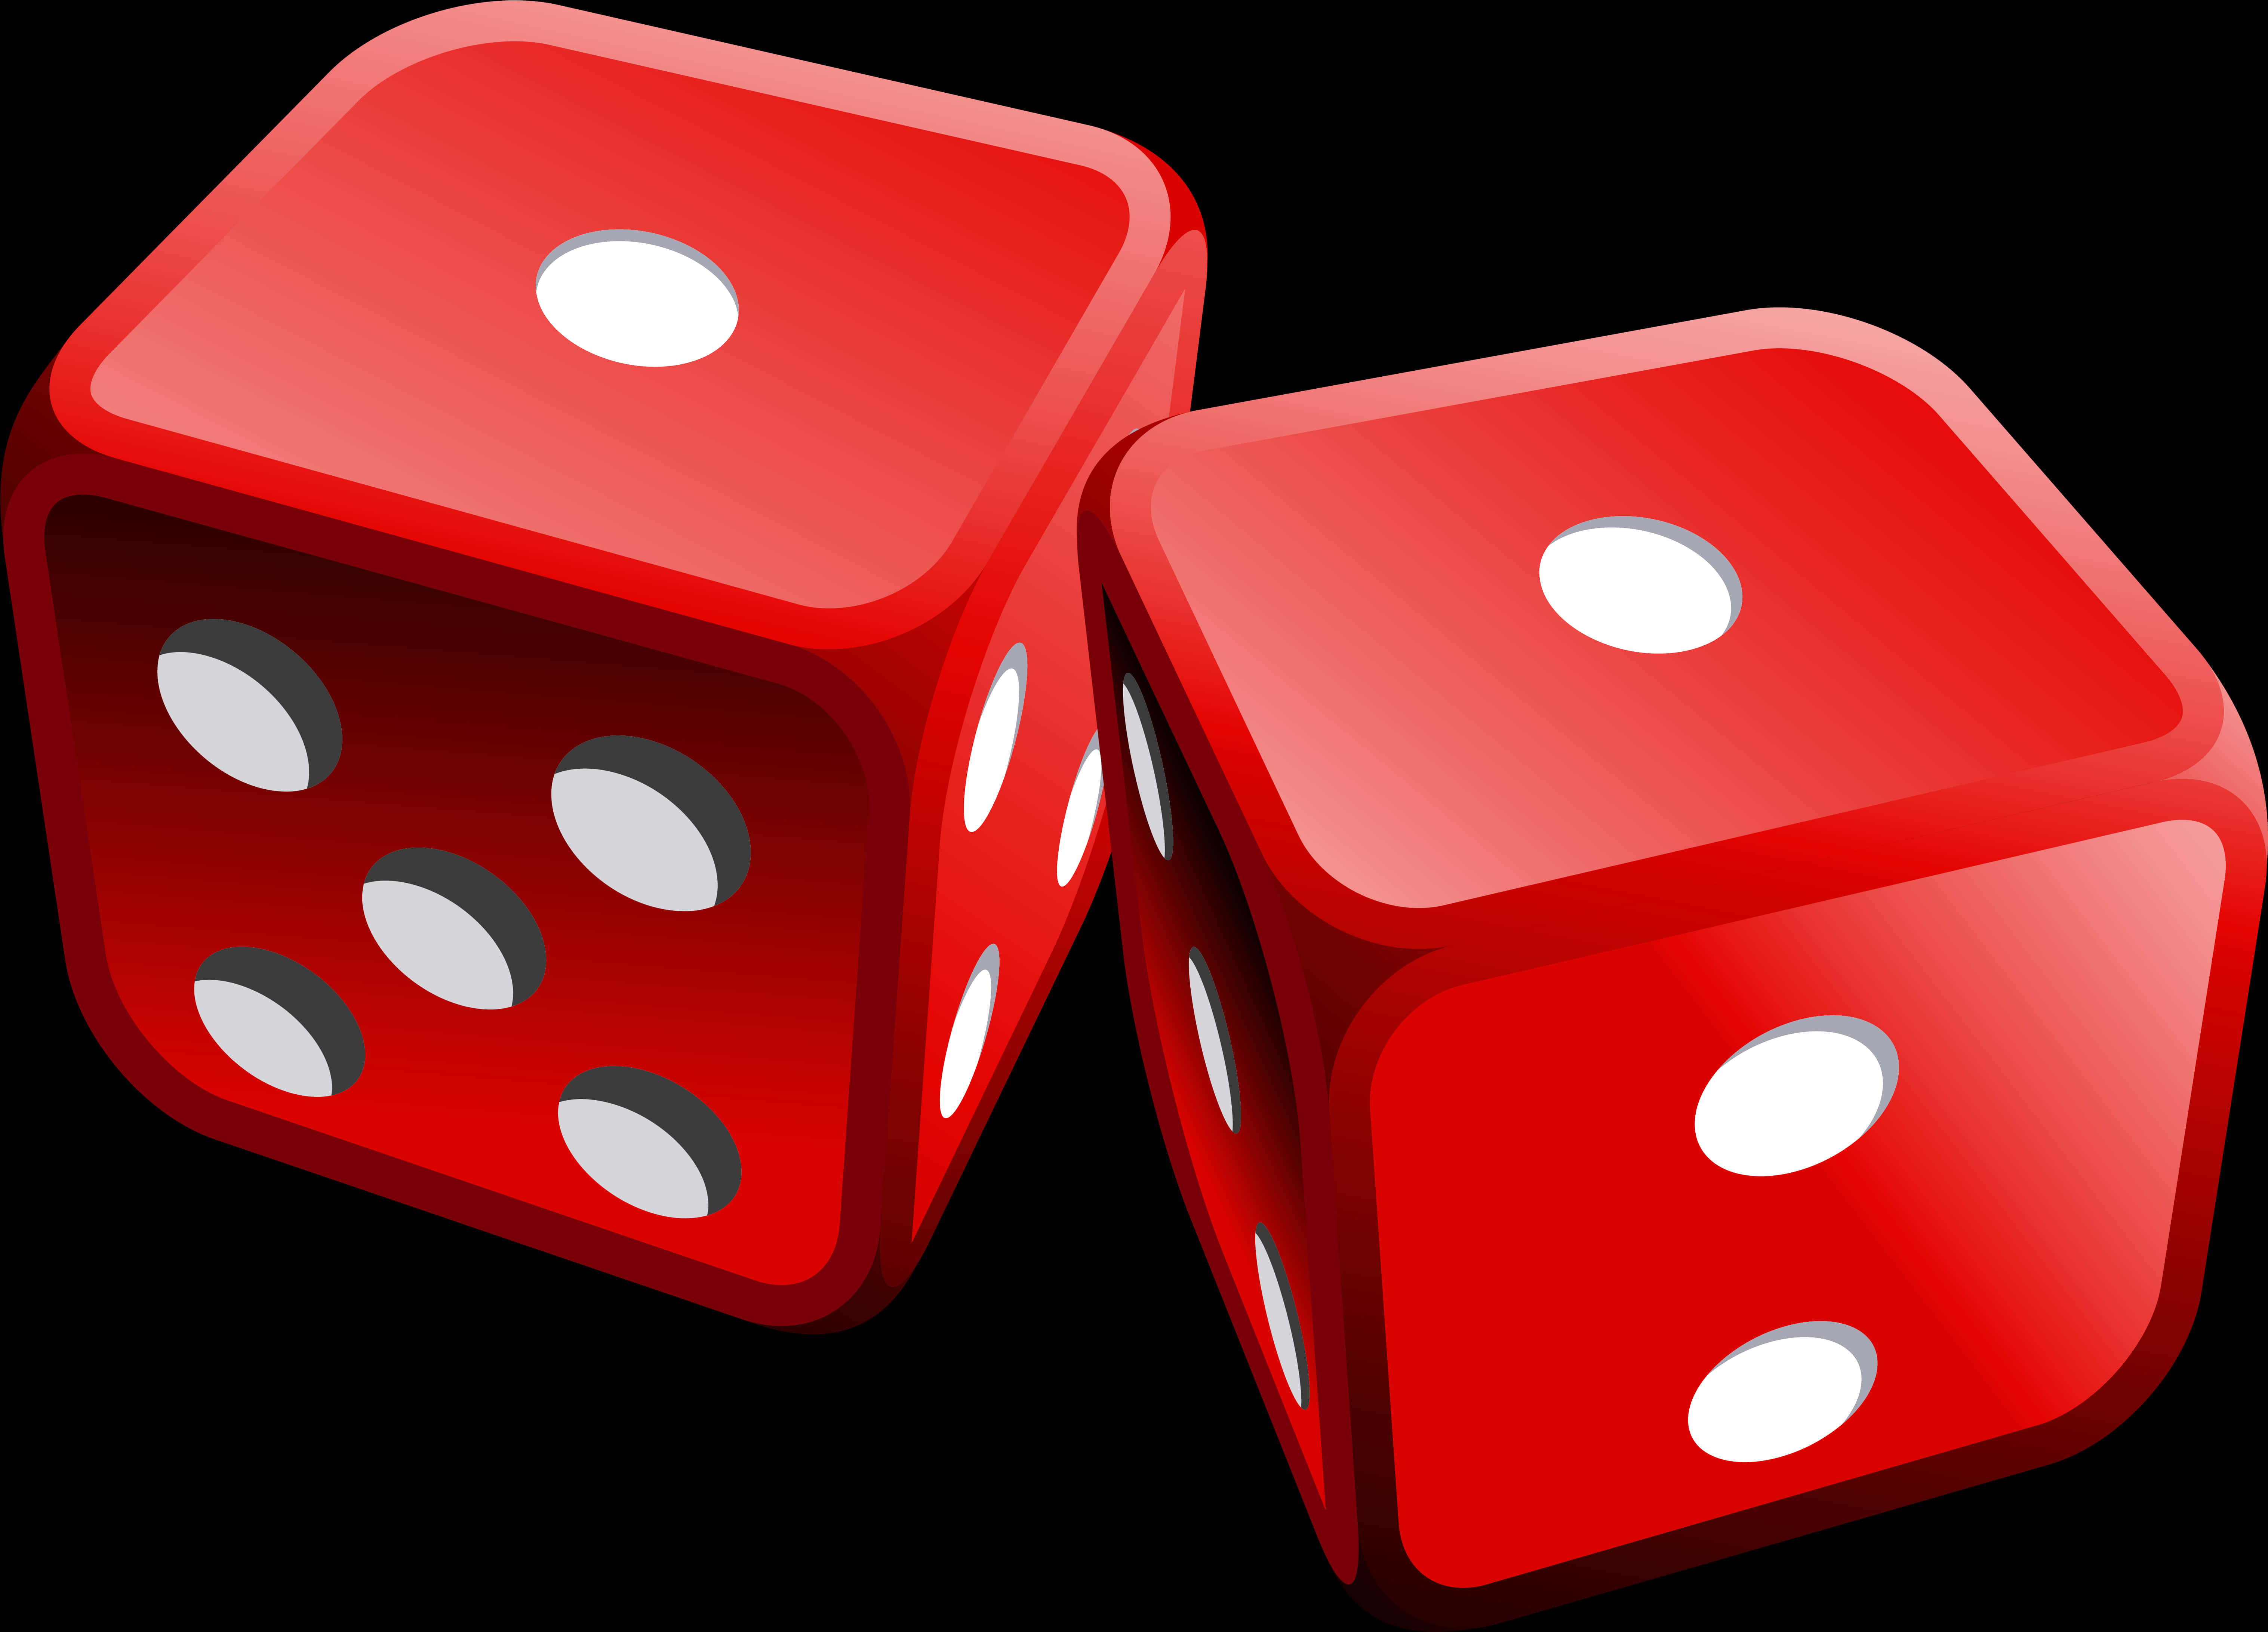 A Pair Of Red Dice With White Dots